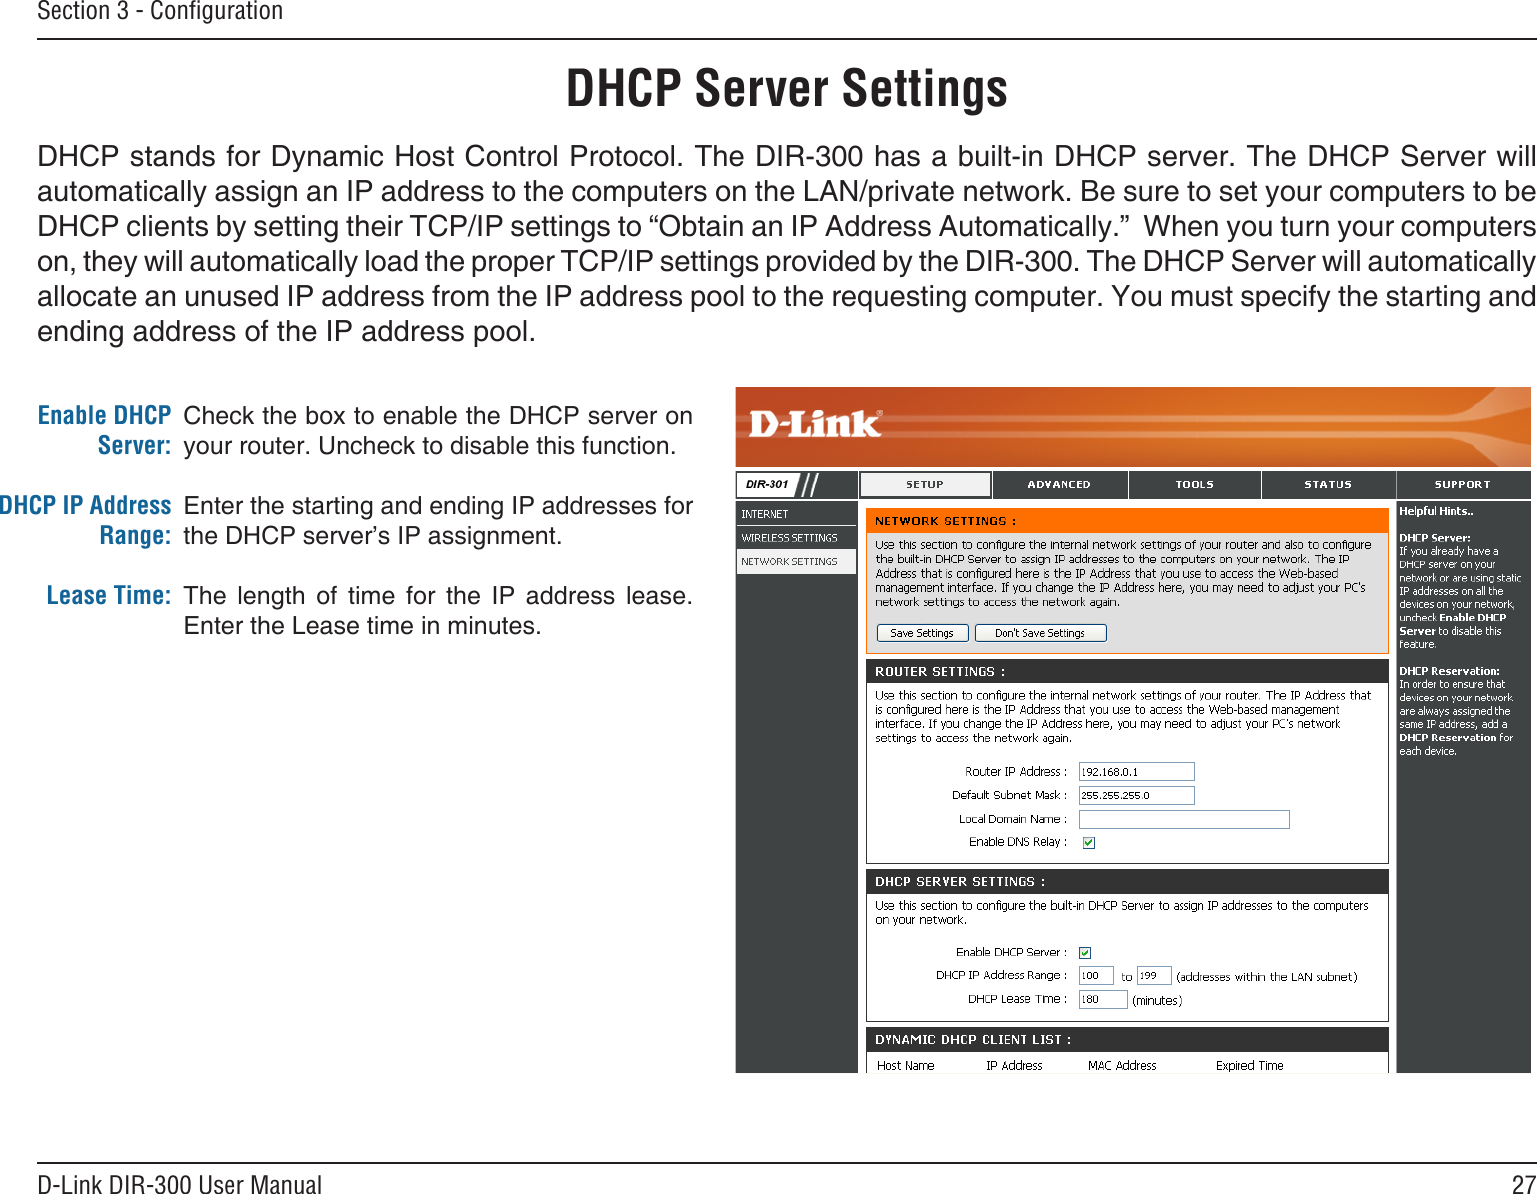 27D-Link DIR-300 User ManualSection 3 - ConﬁgurationCheck the box to enable the DHCP server on your router. Uncheck to disable this function.Enter the starting and ending IP addresses for the DHCP server’s IP assignment.The  length  of  time  for  the  IP  address  lease. Enter the Lease time in minutes.Enable DHCP Server:DHCP IP Address Range:Lease Time:DHCP Server SettingsDHCP stands for Dynamic Host Control Protocol. The DIR-300 has a built-in DHCP server. The DHCP Server will automatically assign an IP address to the computers on the LAN/private network. Be sure to set your computers to be DHCP clients by setting their TCP/IP settings to “Obtain an IP Address Automatically.”  When you turn your computers on, they will automatically load the proper TCP/IP settings provided by the DIR-300. The DHCP Server will automatically allocate an unused IP address from the IP address pool to the requesting computer. You must specify the starting and ending address of the IP address pool.